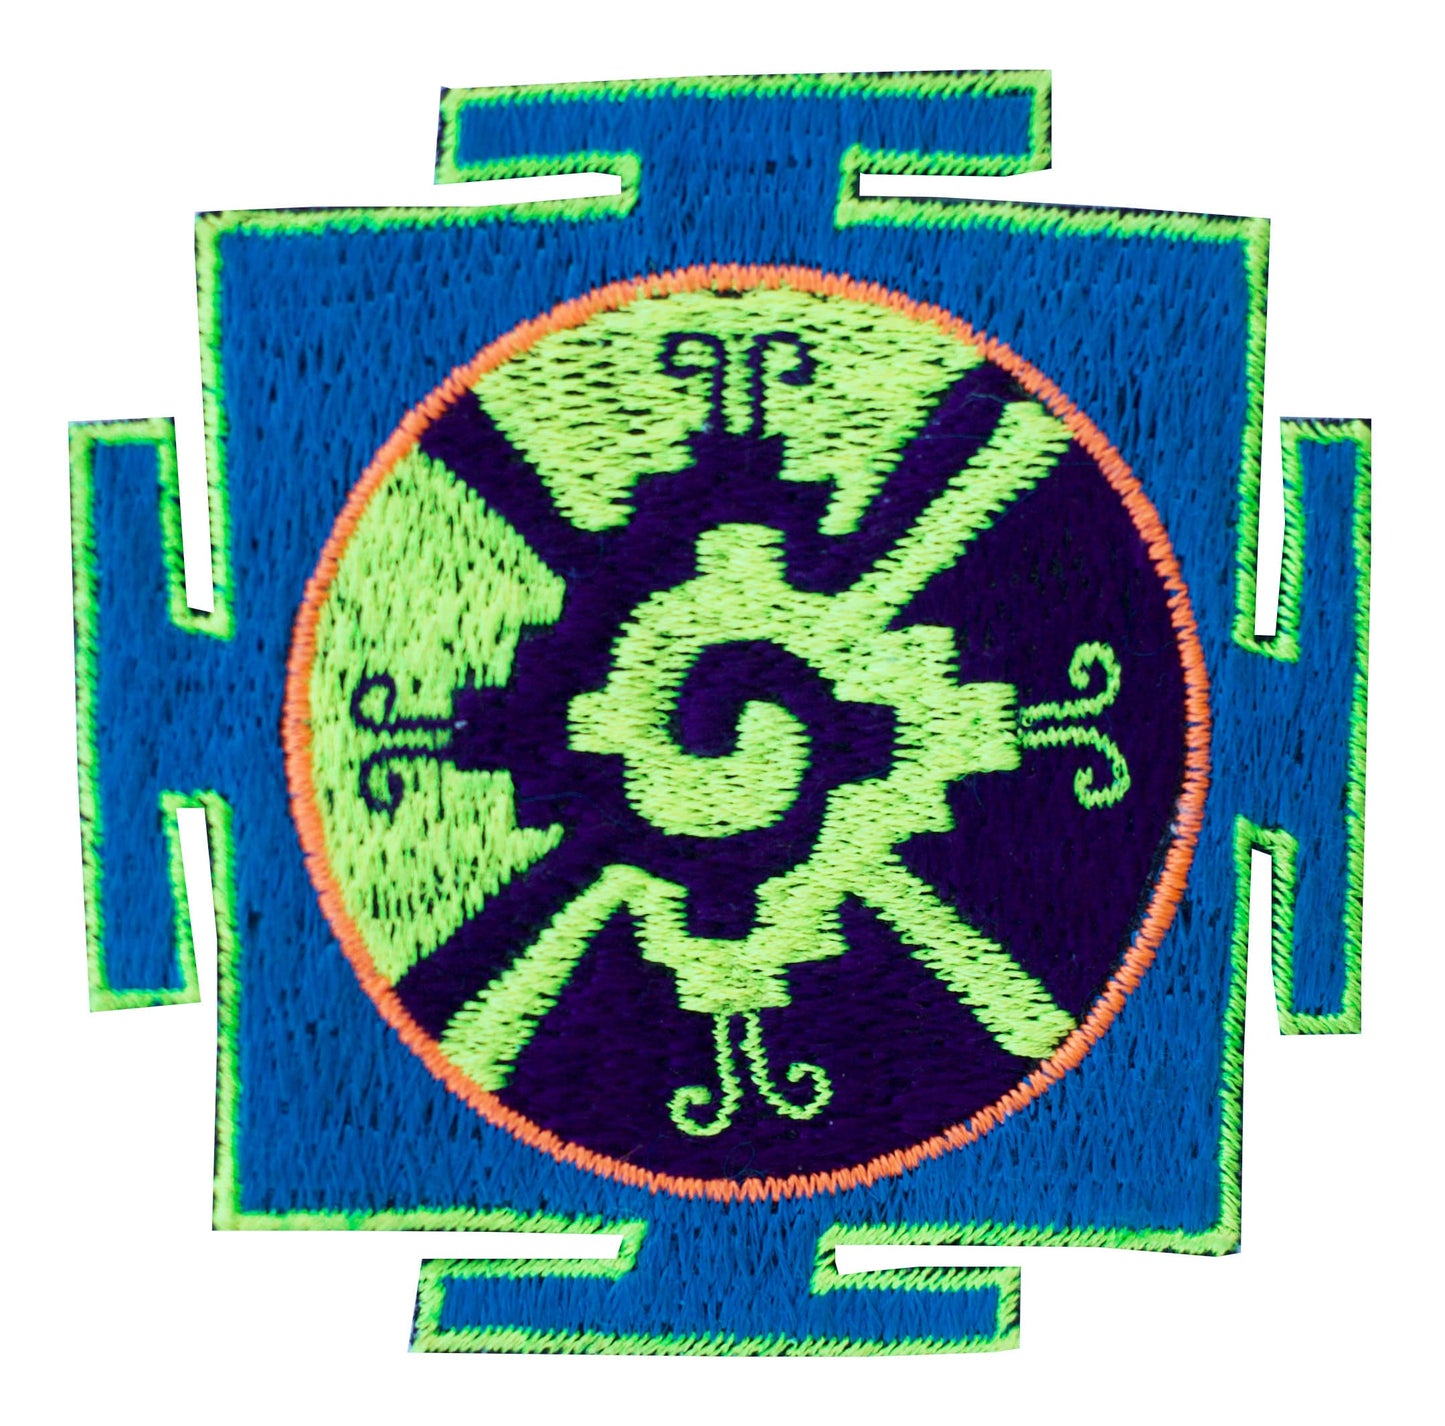 Blue Hunab Ku small embroidery patch 3.3 inches for sew on - blacklight glowing Maya art for the center of our galaxy